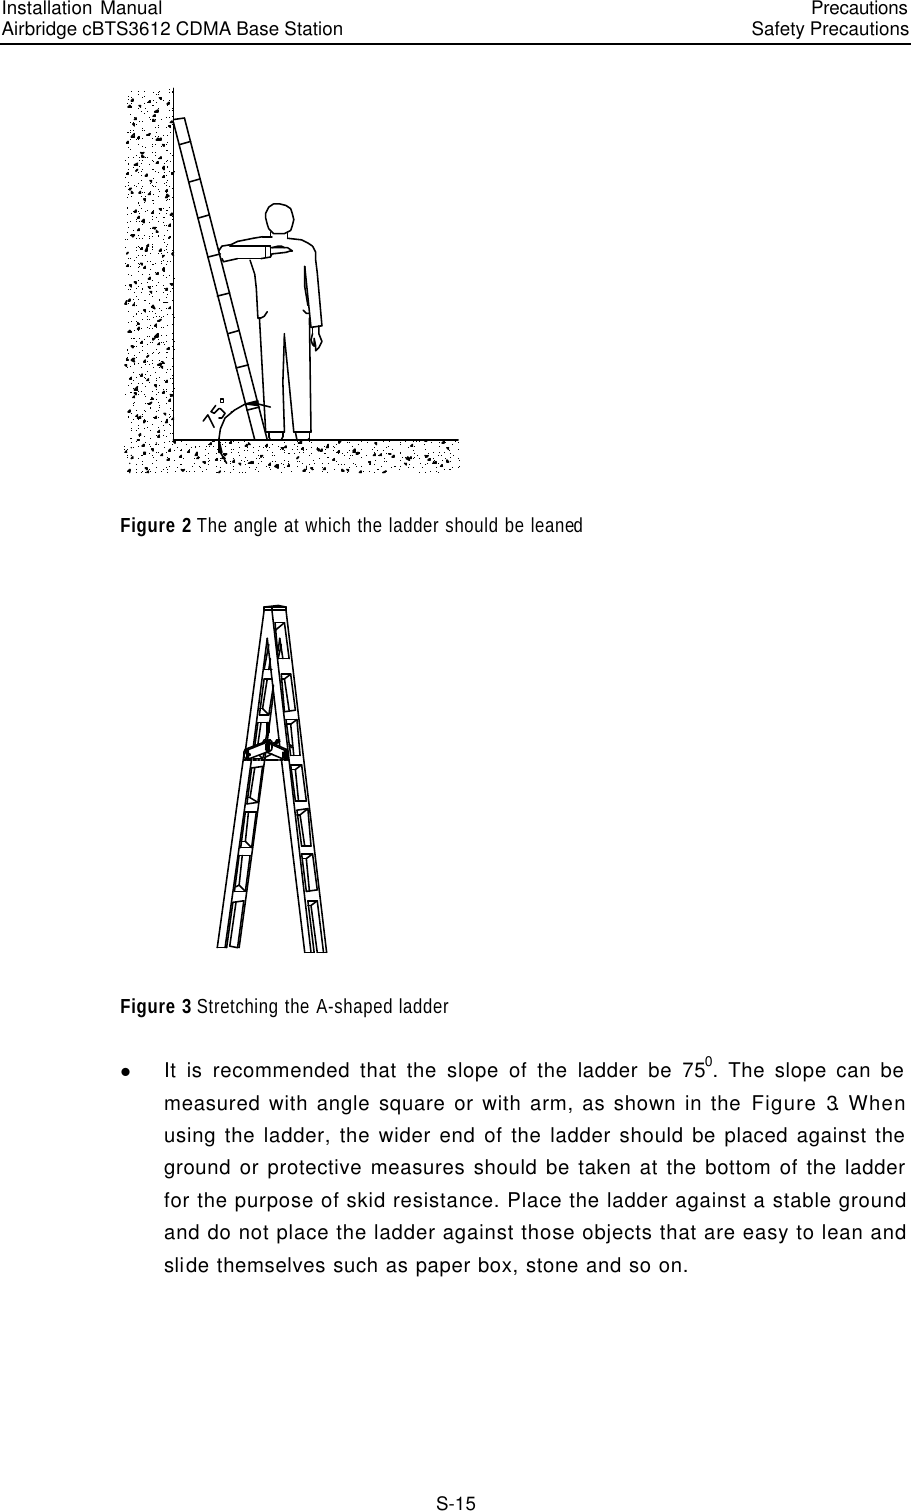 Installation Manual   Airbridge cBTS3612 CDMA Base Station   PrecautionsSafety Precautions　S-15  Figure 2 The angle at which the ladder should be leaned  Figure 3 Stretching the A-shaped ladder   l It is recommended that the slope of the ladder be 750. The slope can be measured with angle square or with arm, as shown in the Figure 3. When using the ladder, the wider end of the ladder should be placed against the ground or protective measures should be taken at the bottom of the ladder for the purpose of skid resistance. Place the ladder against a stable ground and do not place the ladder against those objects that are easy to lean and slide themselves such as paper box, stone and so on. 